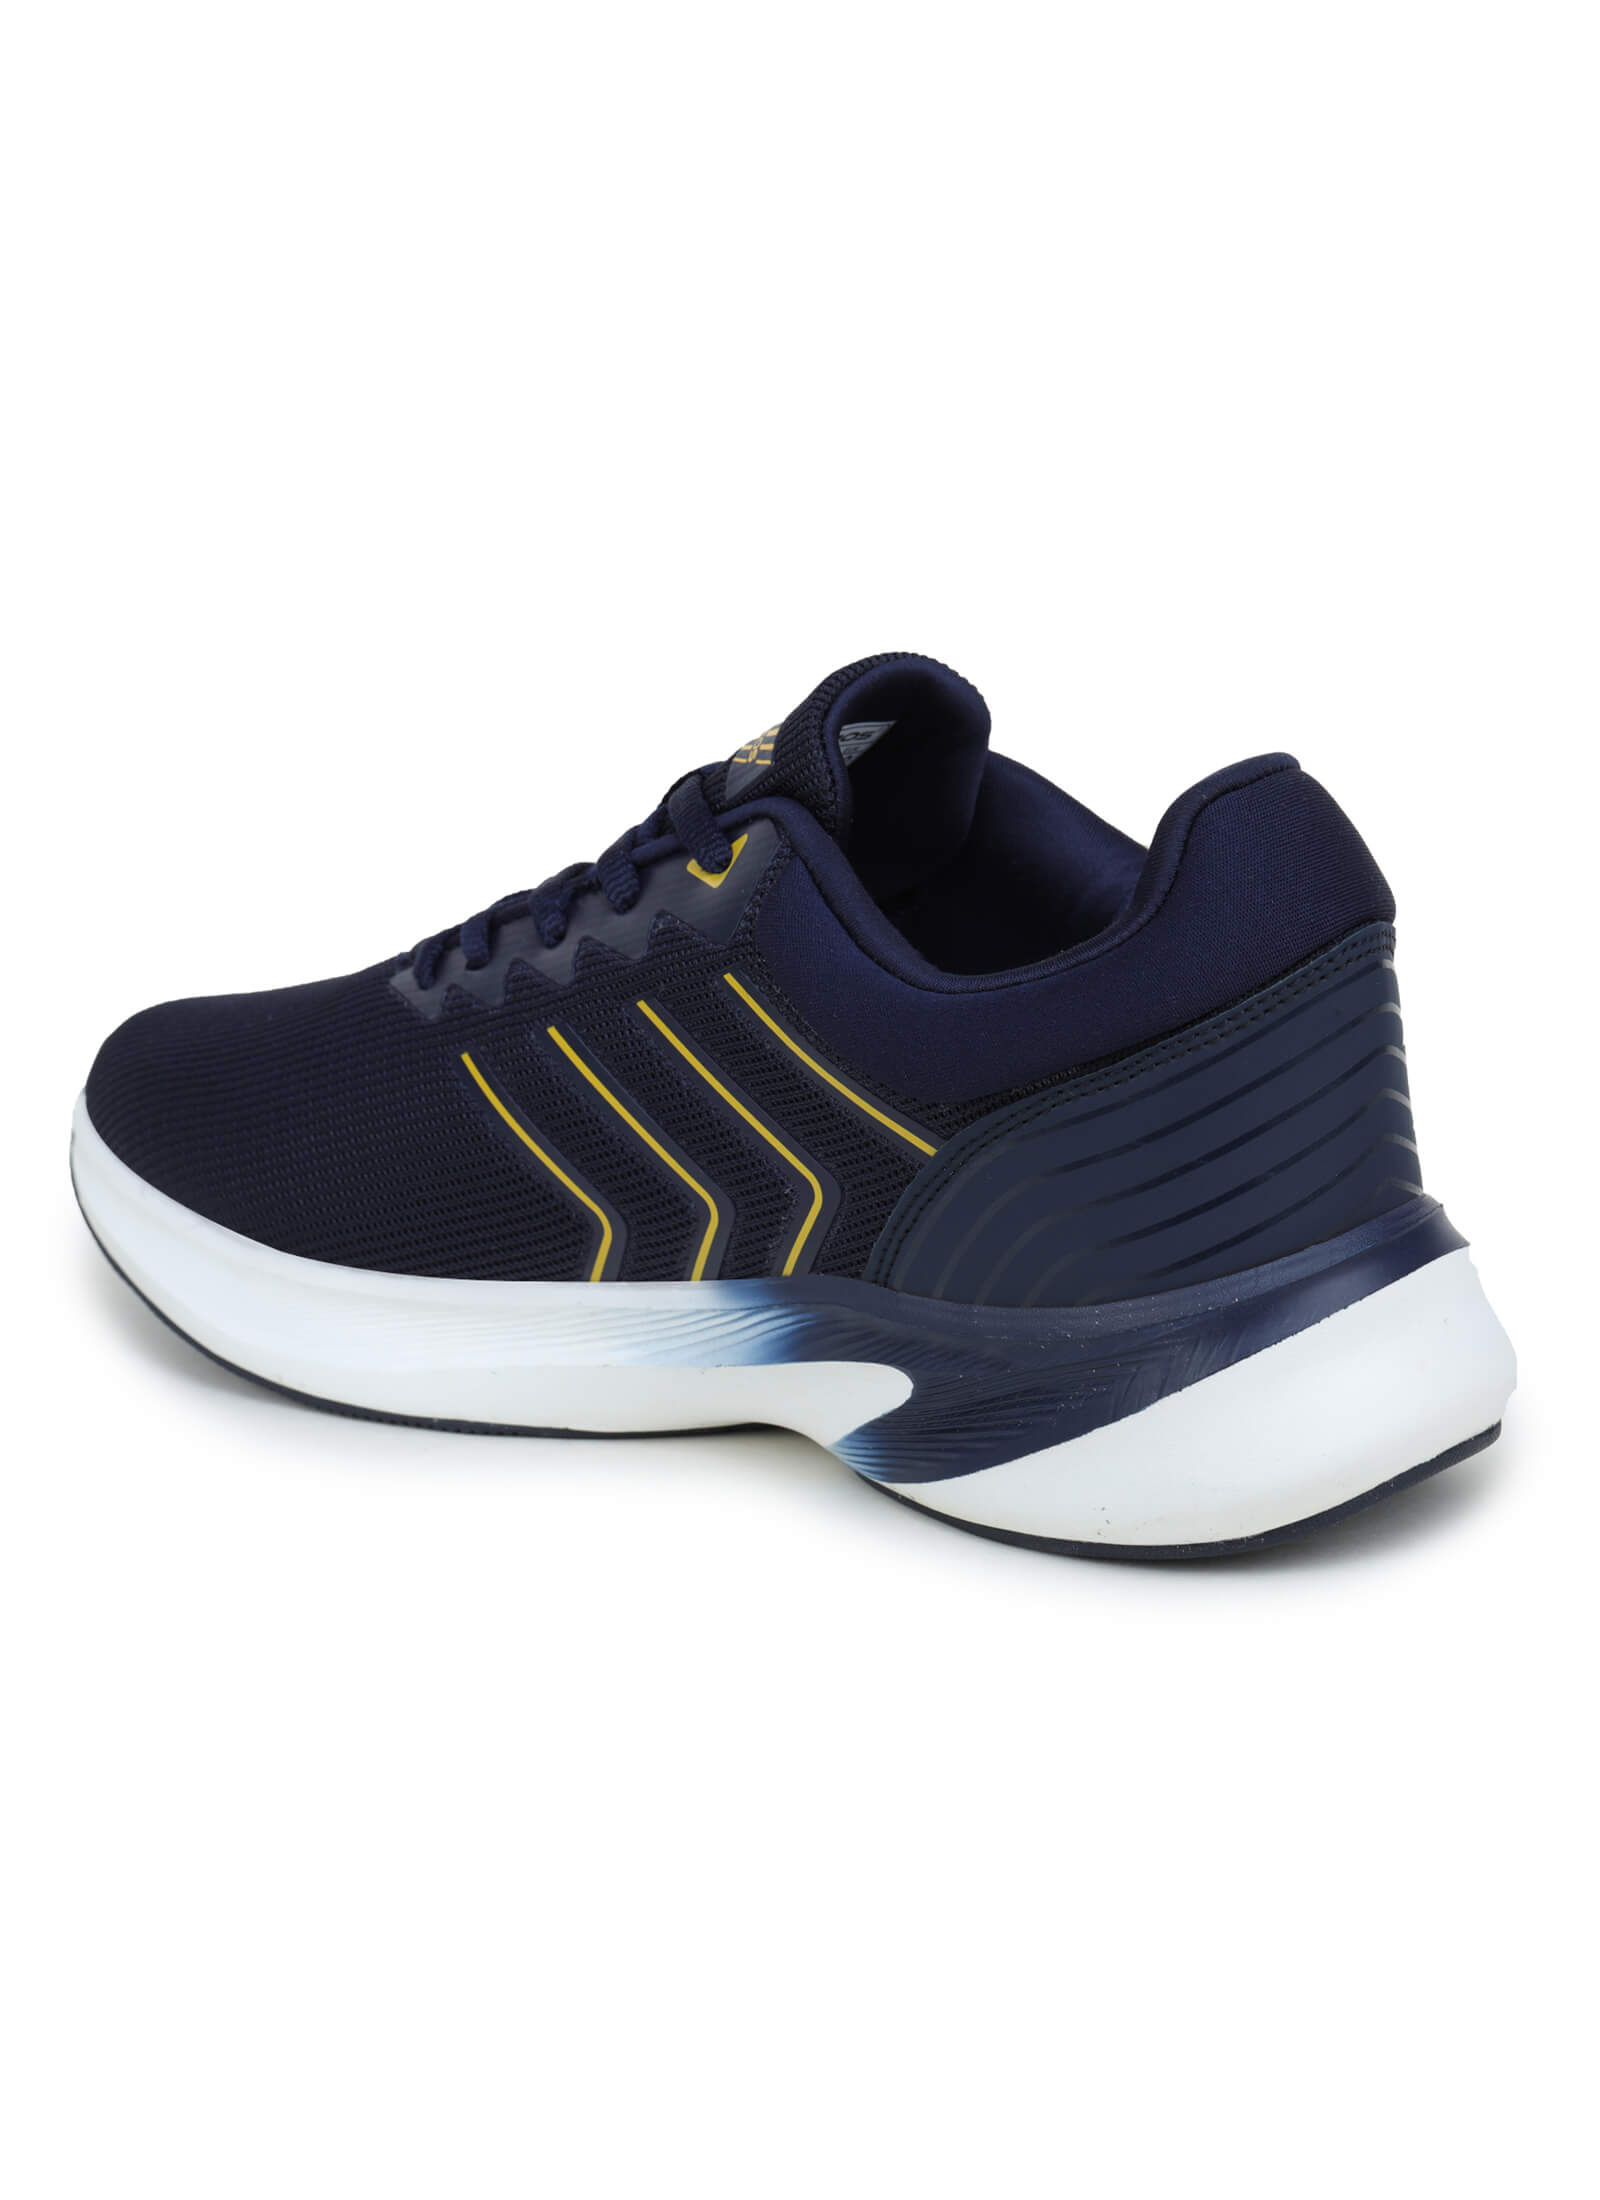 Bairstow-1 Anti-Skid Sports Shoes For Men